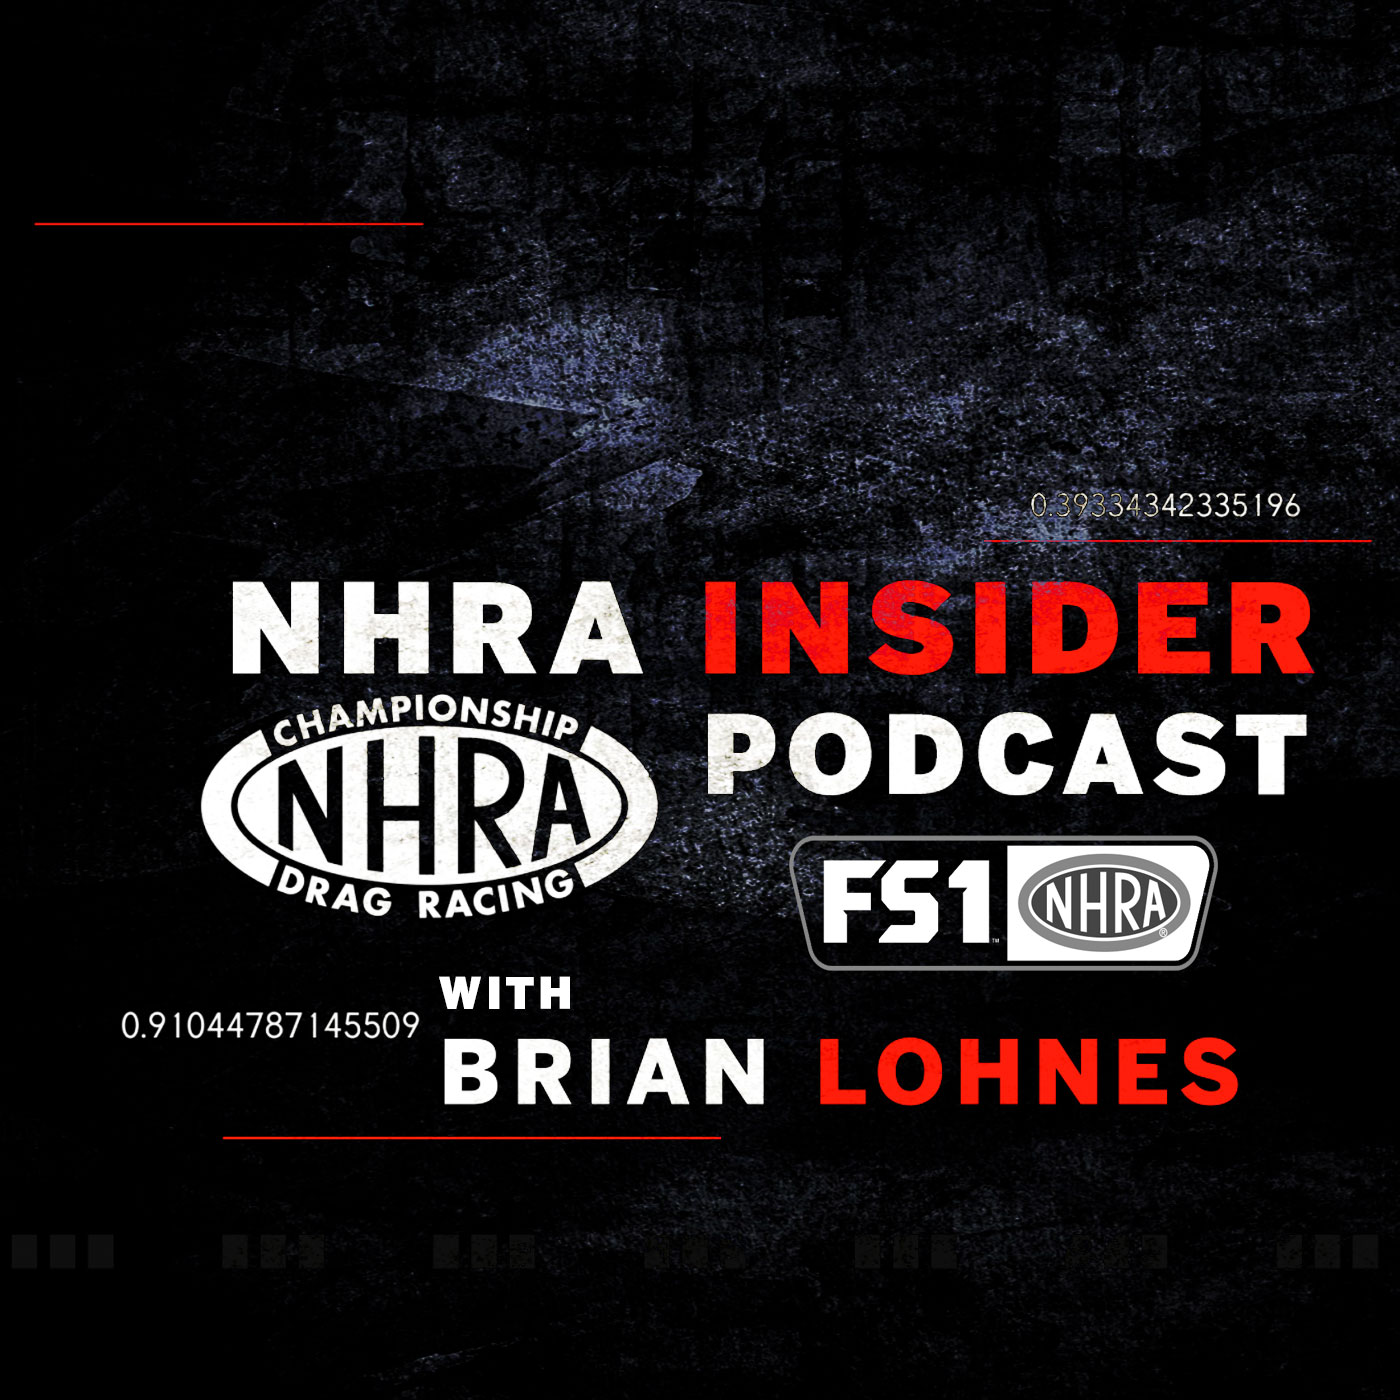 NHRA Insider Podcast: The Grudge Men Cometh – Joey Gladstone and JR Gray Talk NHRA, Grudge Racing, and More